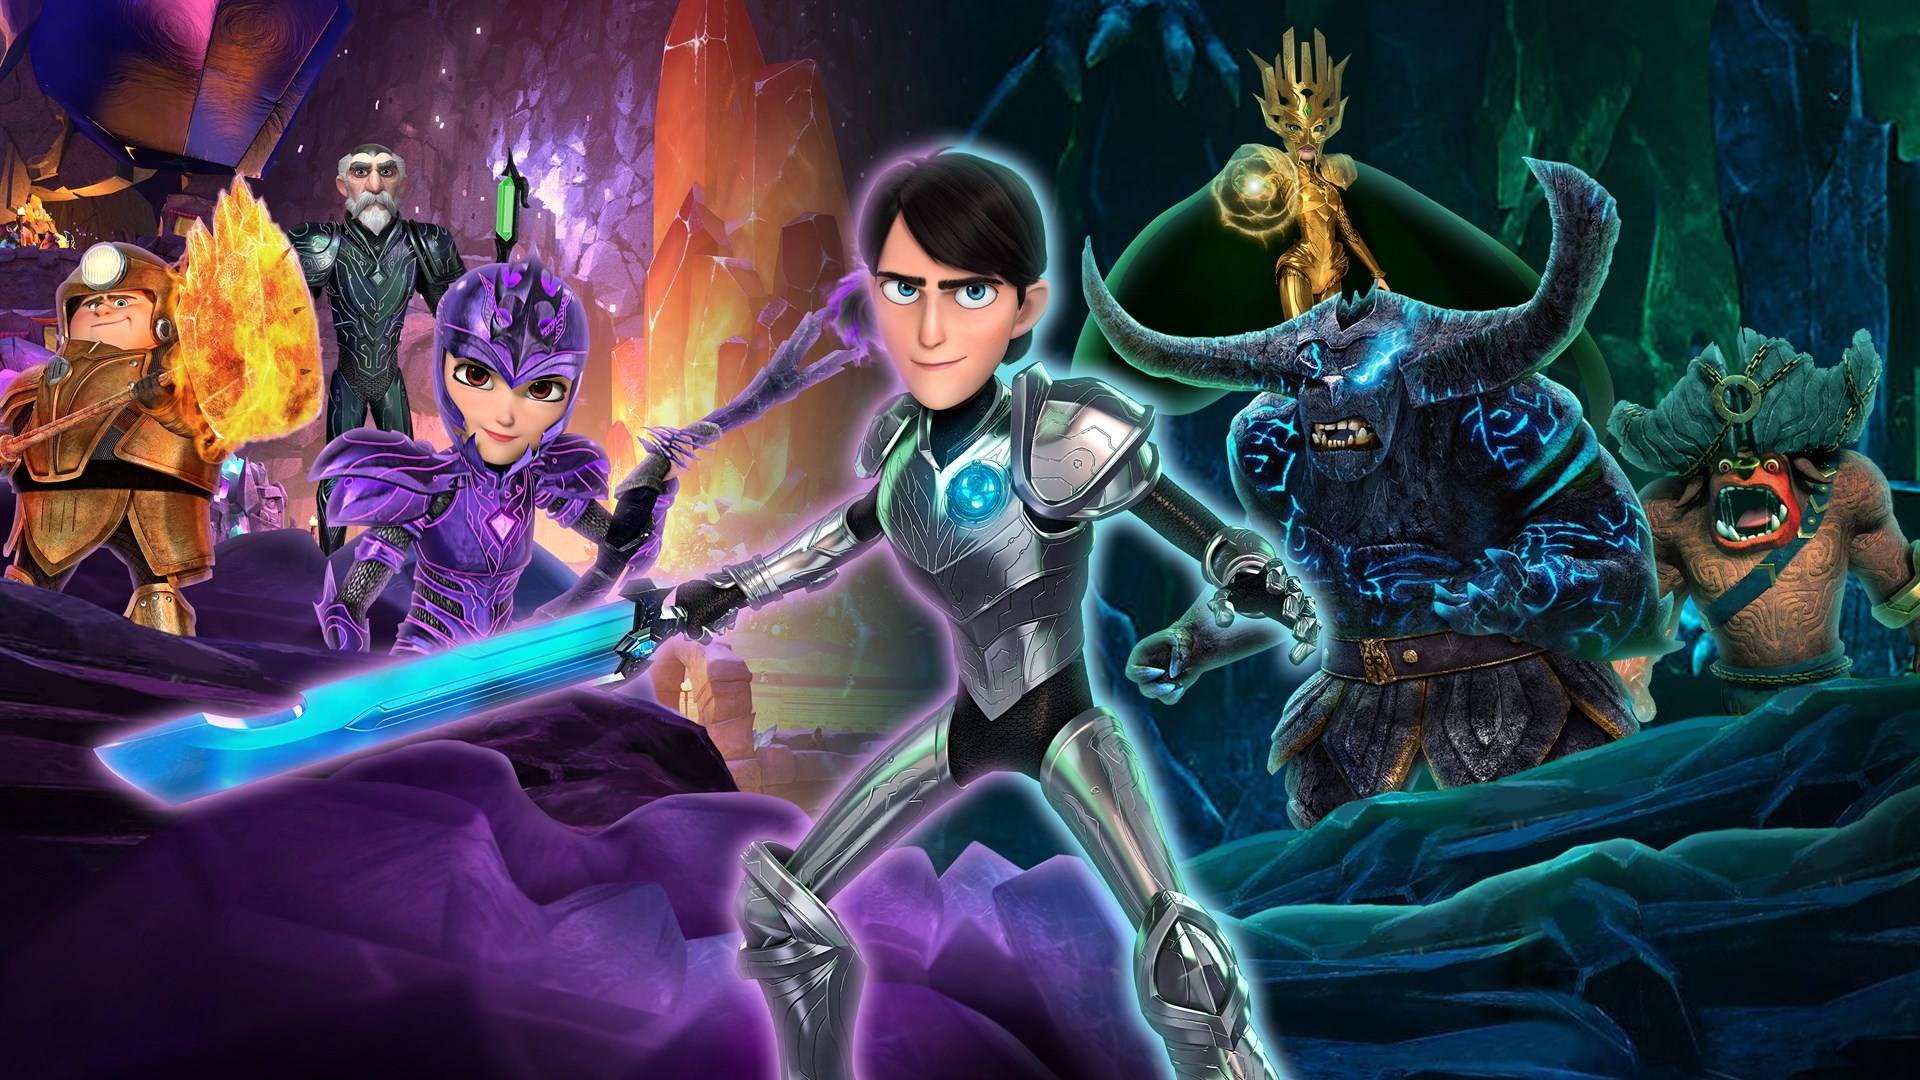 Trollhunters: Rise of the Titans, Free download images, Wallpaper collection, Fan favorites, 1920x1080 Full HD Desktop